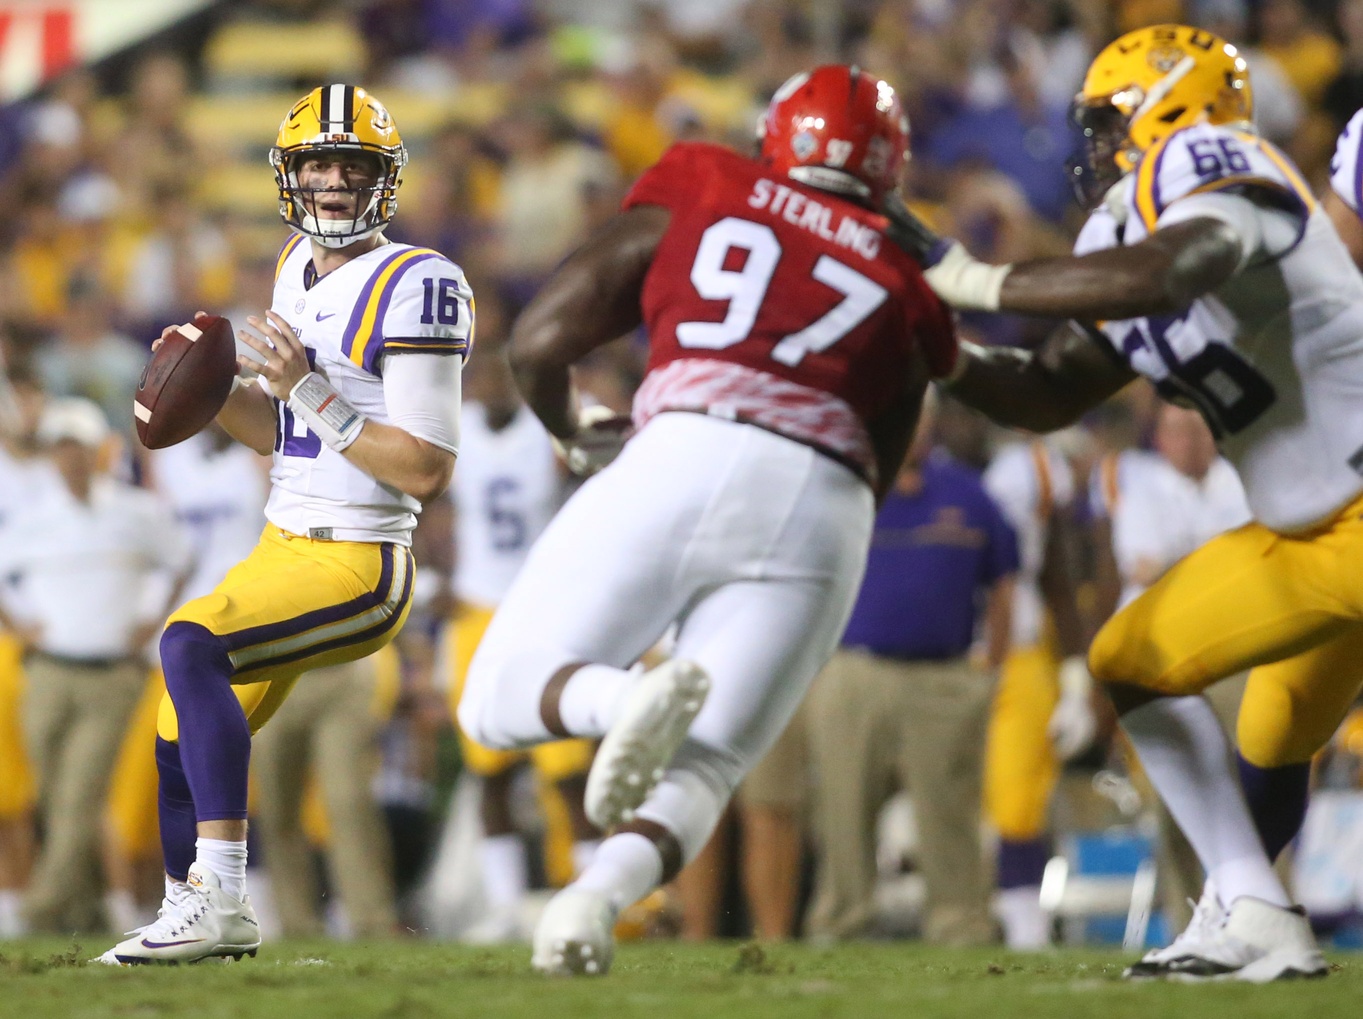 Sep 10, 2016; Baton Rouge, LA, USA; LSU Tigers quarterback Danny Etling (16) looks to pass the ball against the Jacksonville State Gamecocks in the second quarter at Tiger Stadium. Mandatory Credit: Crystal LoGiudice-USA TODAY Sports